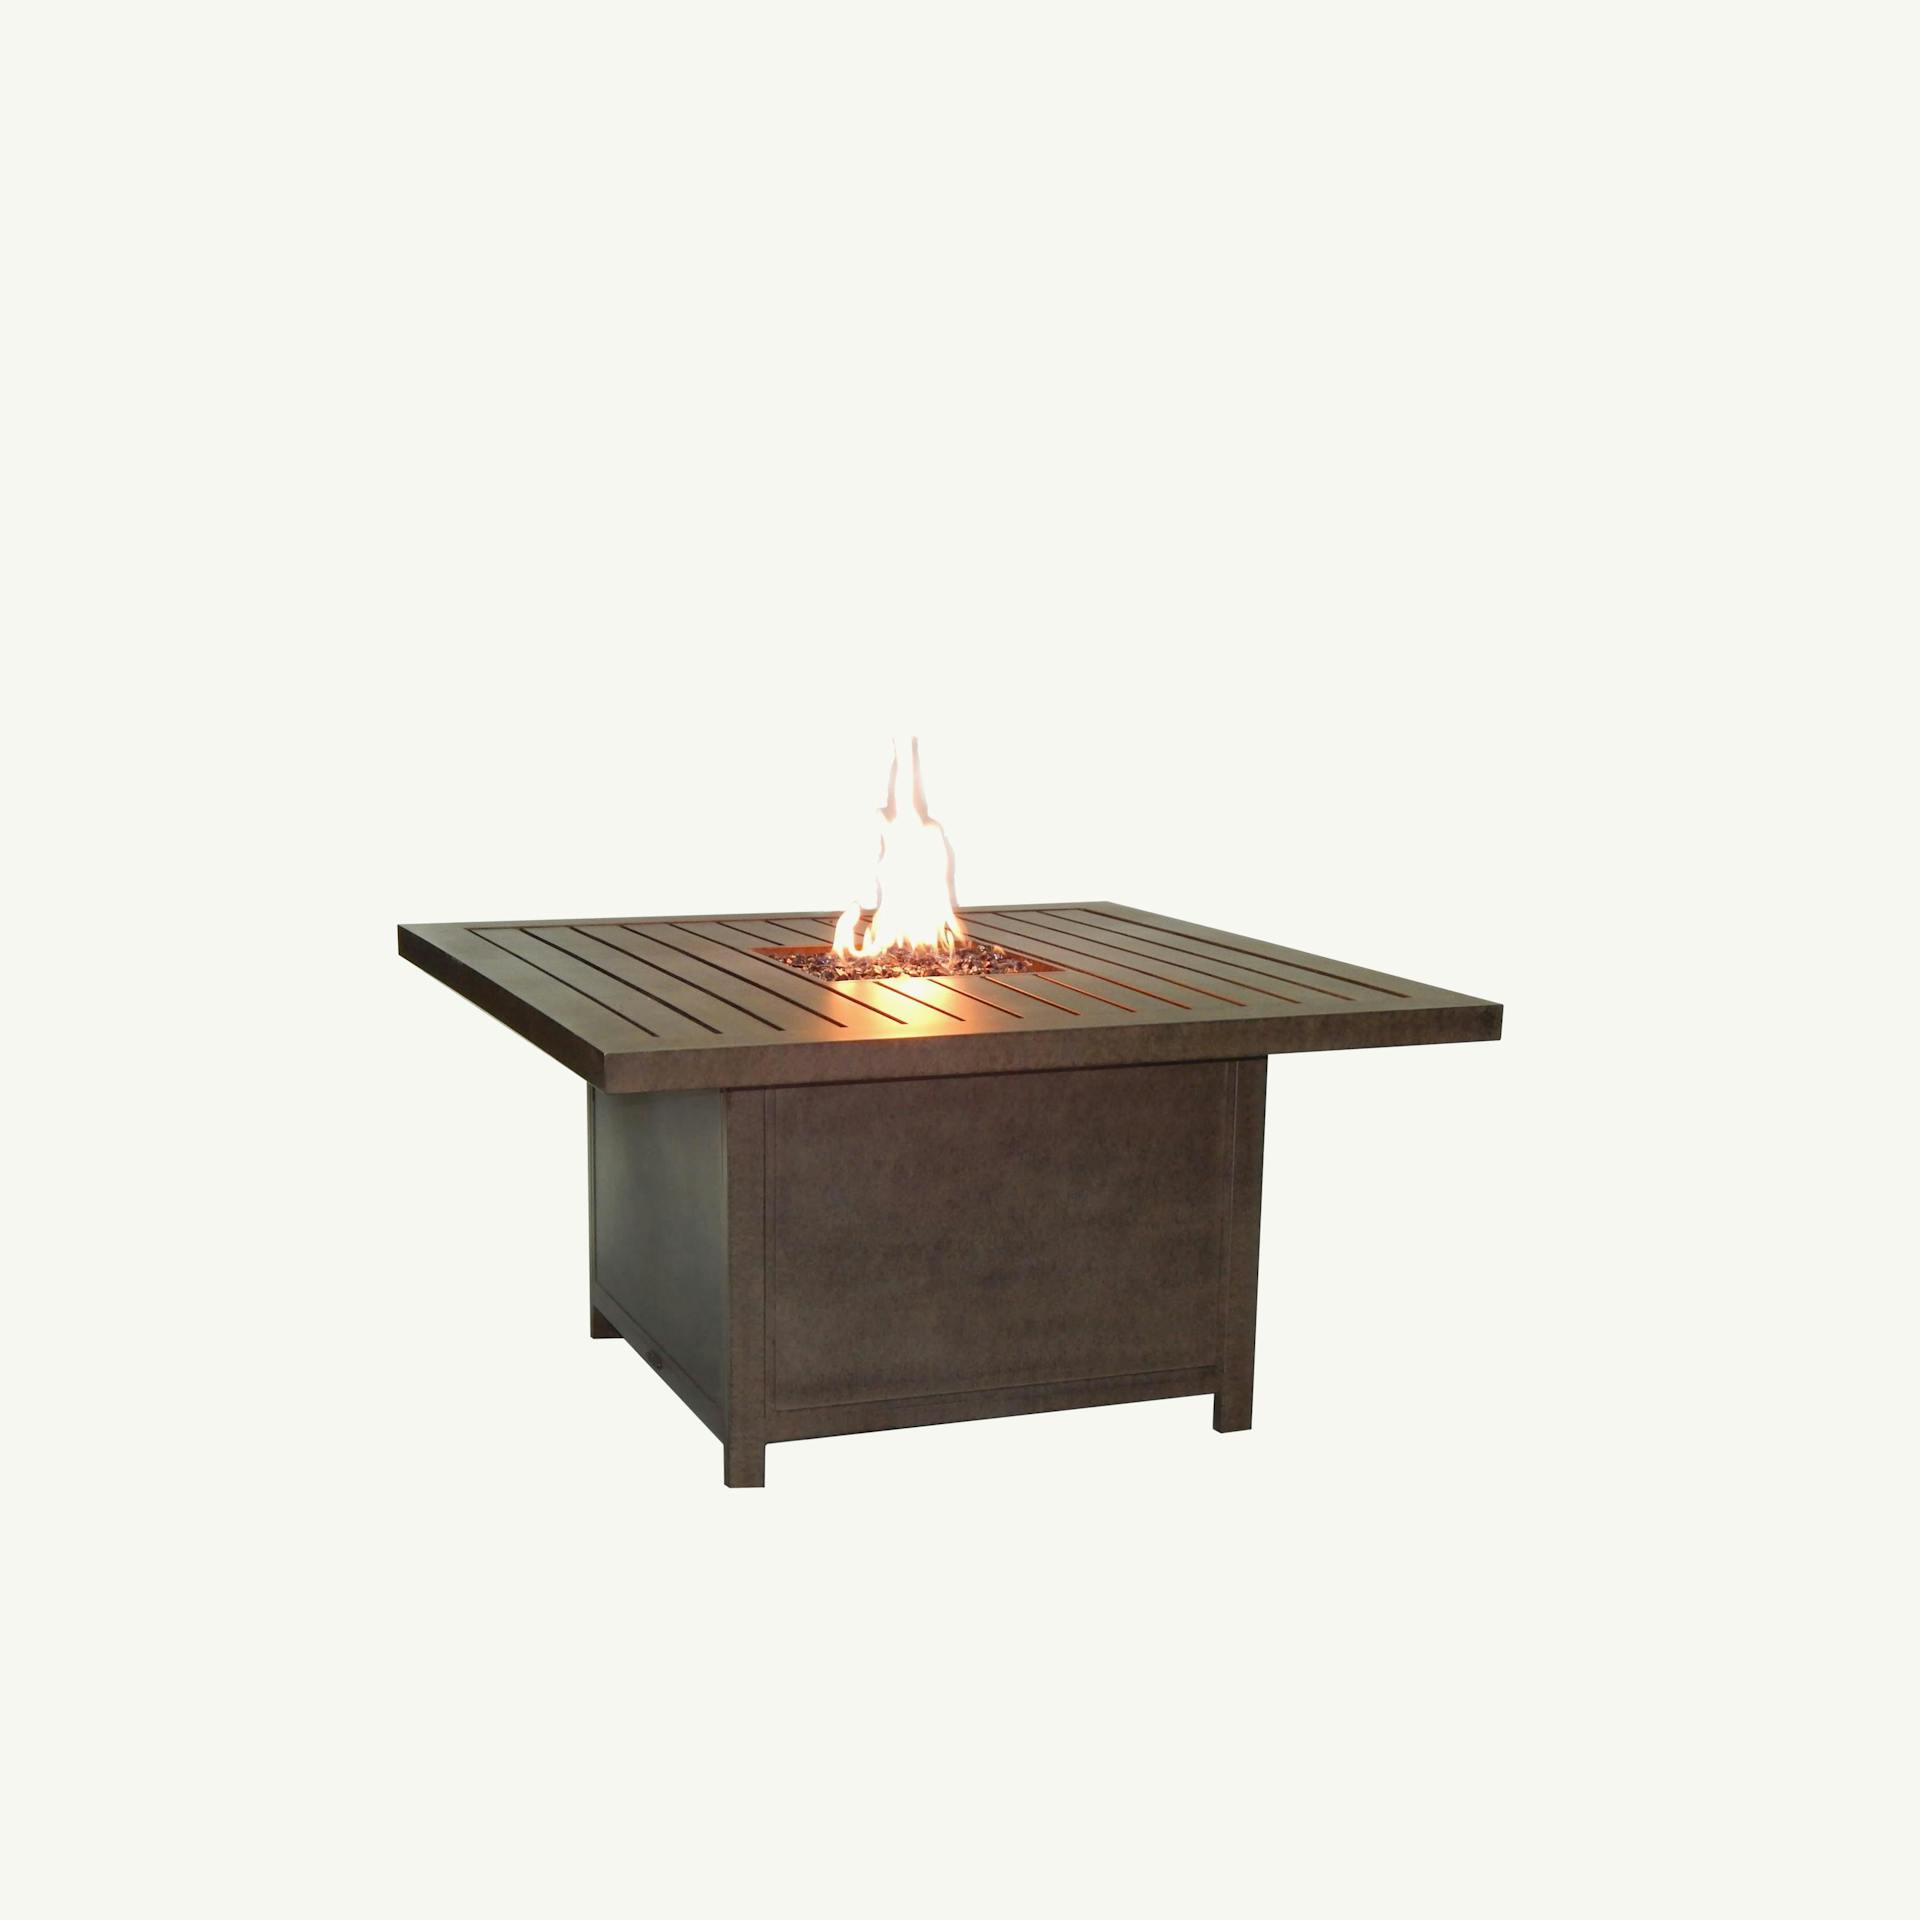 Moderna 44" Square Coffee Table With Firepit